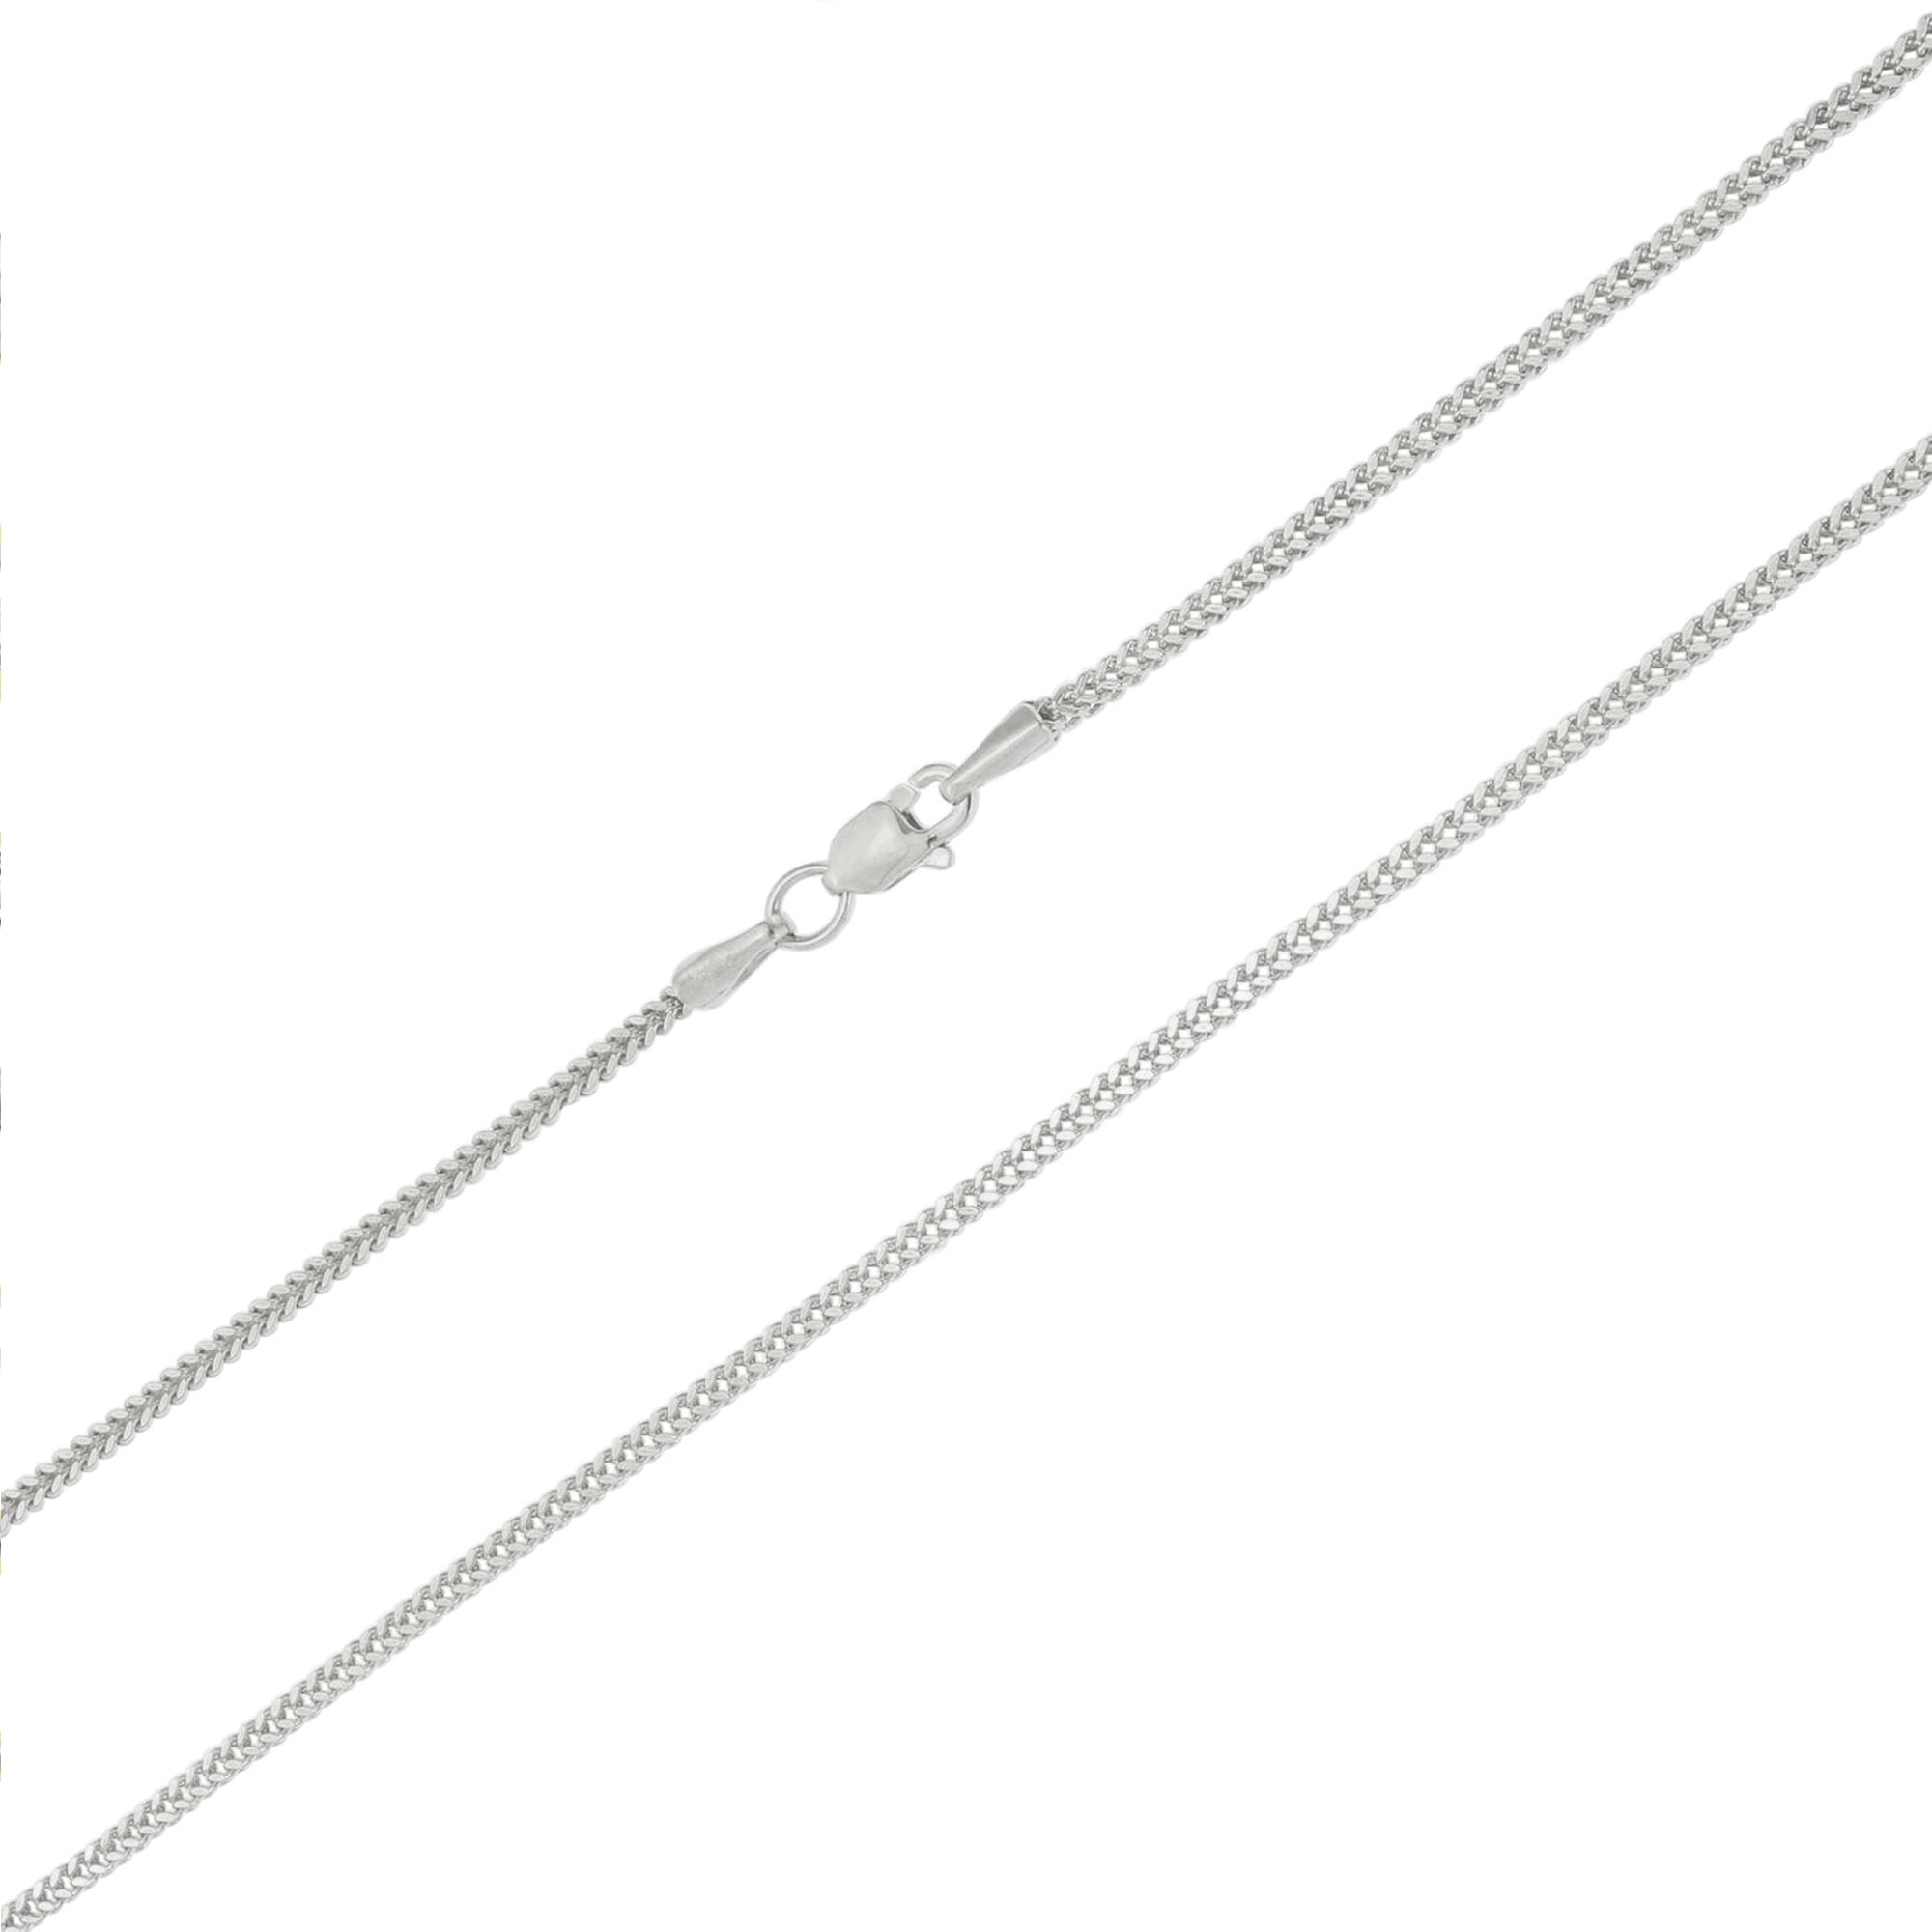 Finejewelers 9 Inch 14k White Gold 1.25mm Solid Polished Spiga Chain Ankle Bracelet Smaller Ankles